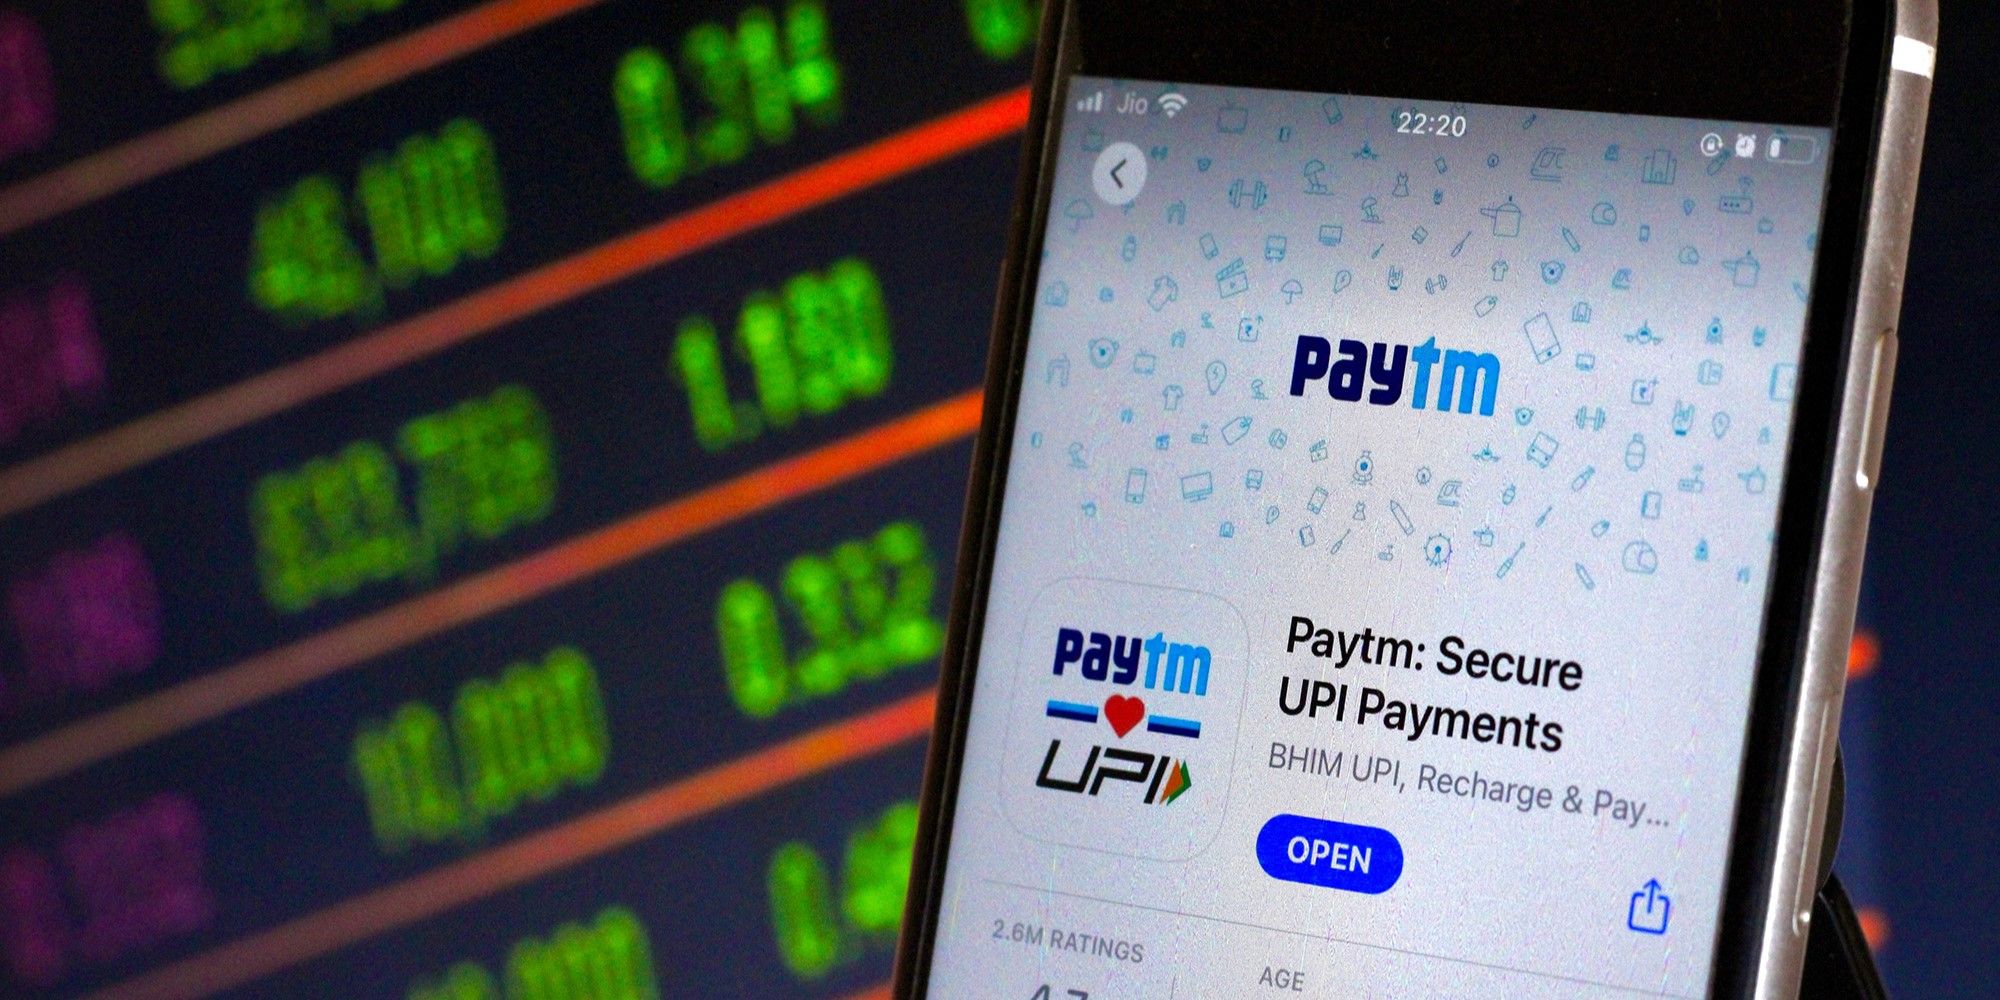 Macquarie downgrades Paytm to 'Underperform', cuts target price to Rs 275